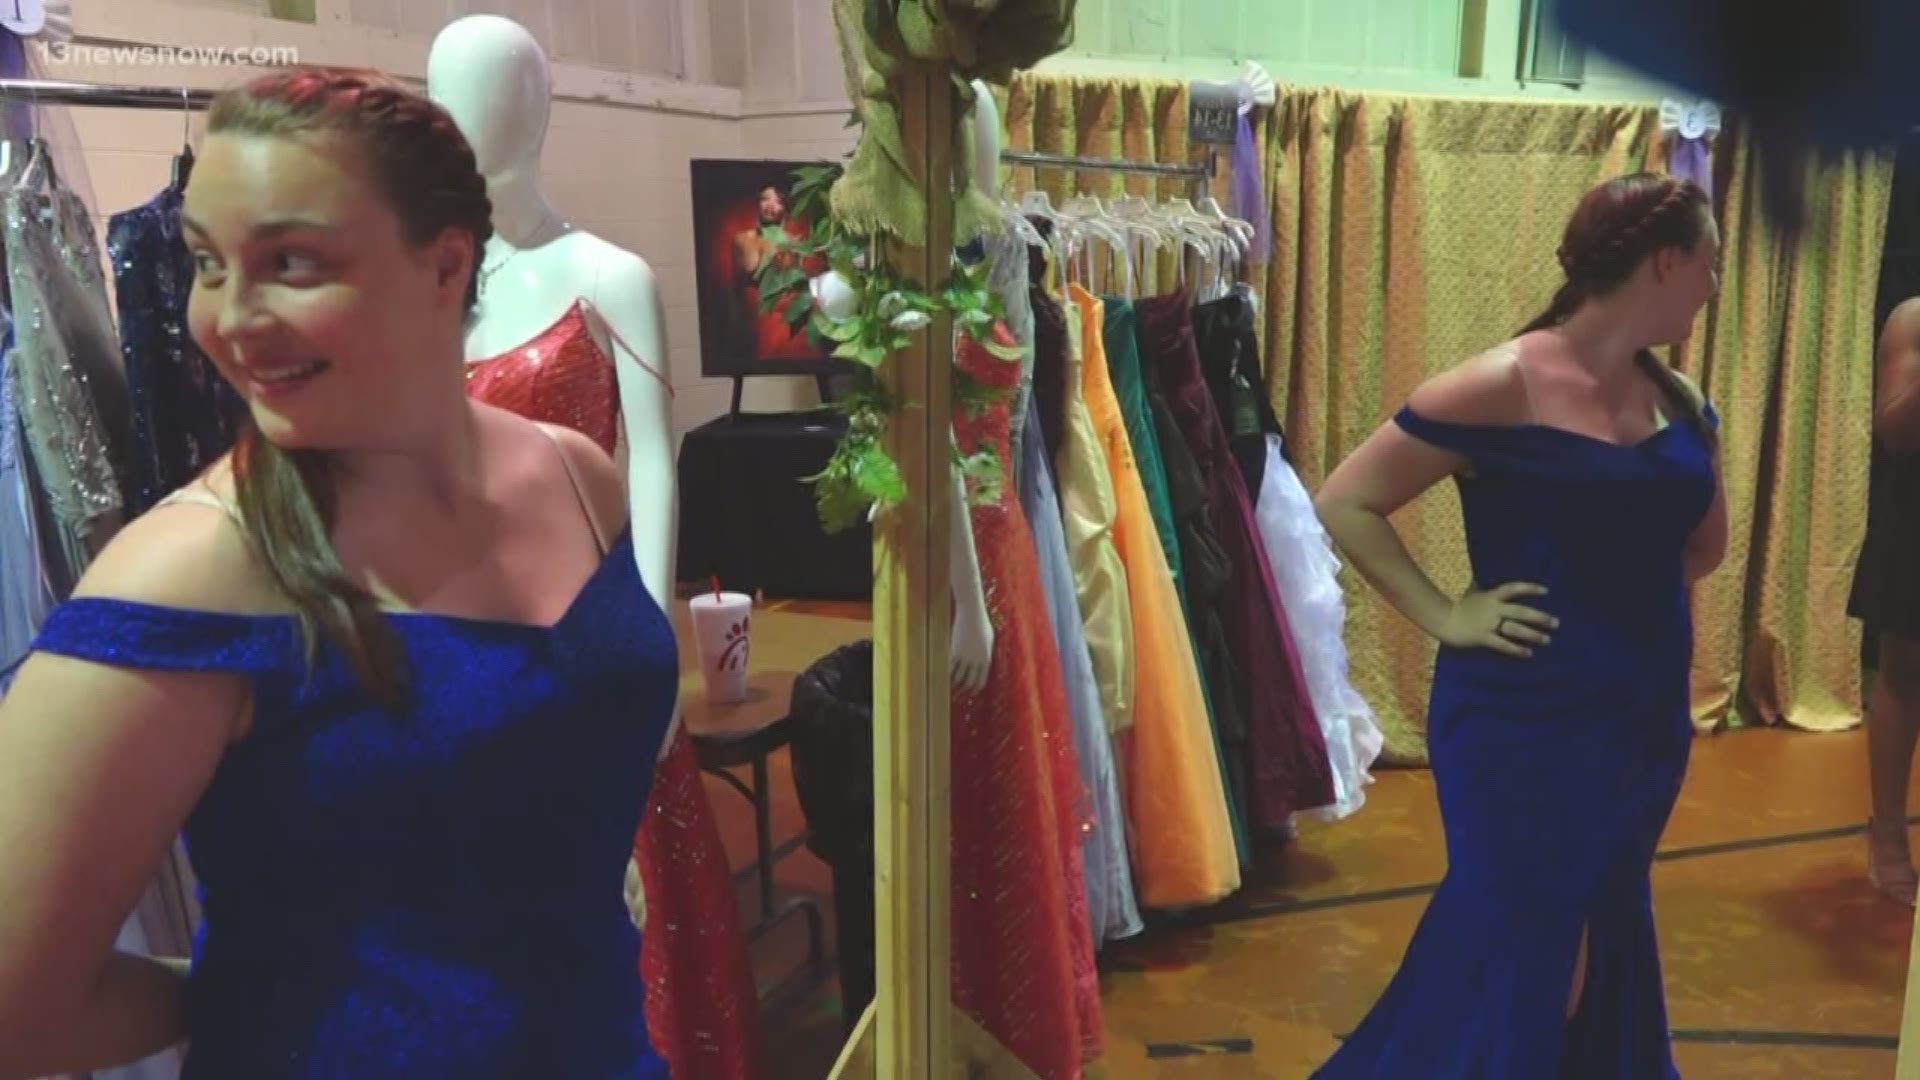 Some of the girls were grateful for the chance to find their dream prom dress — and thankful for the opportunity.